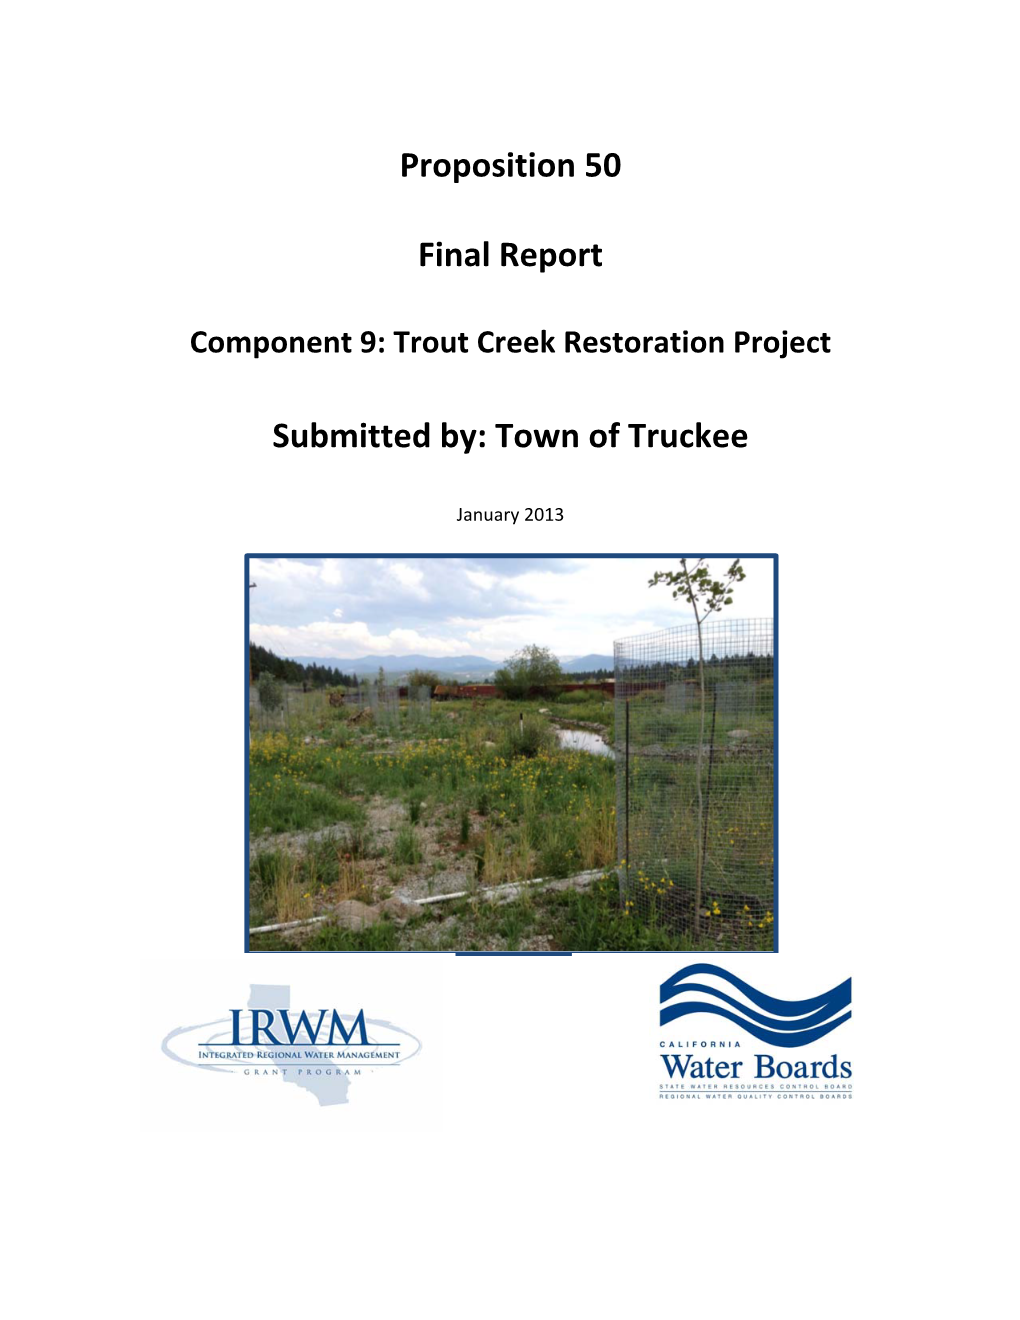 Proposition 50 Final Report Submitted By: Town of Truckee